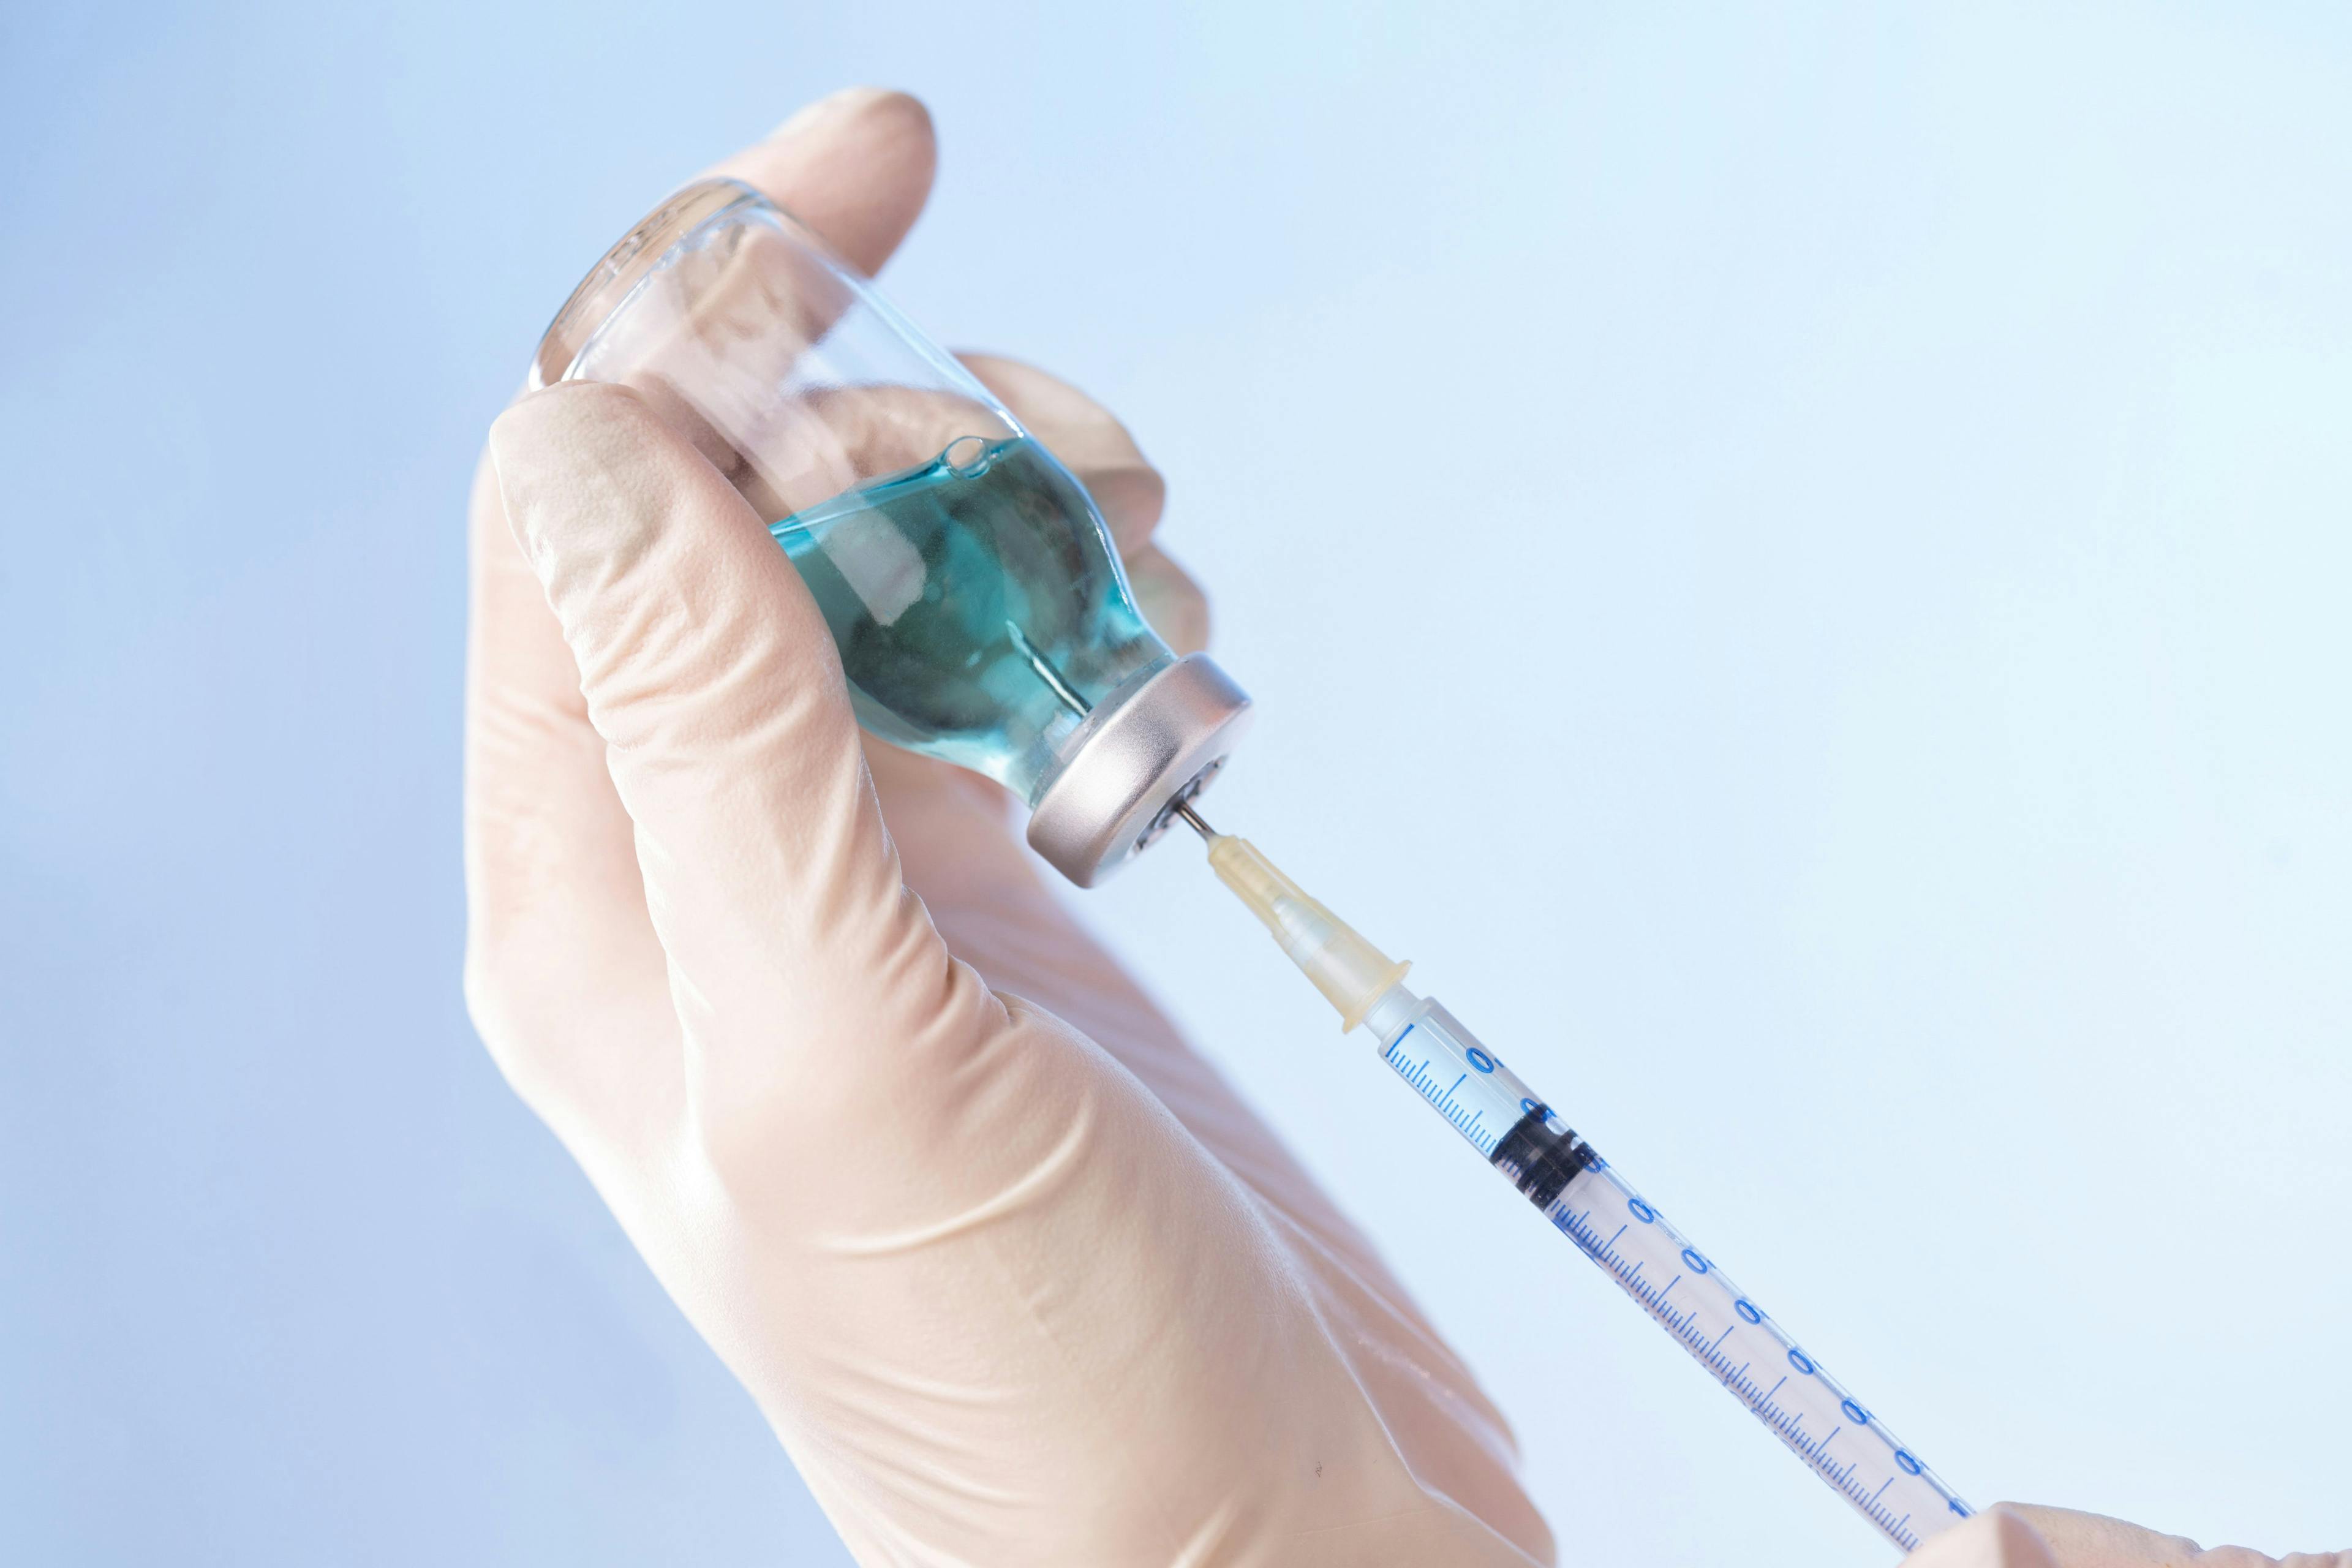 person wearing rubber gloves filling a subcutaneous syringe with a teal liquid